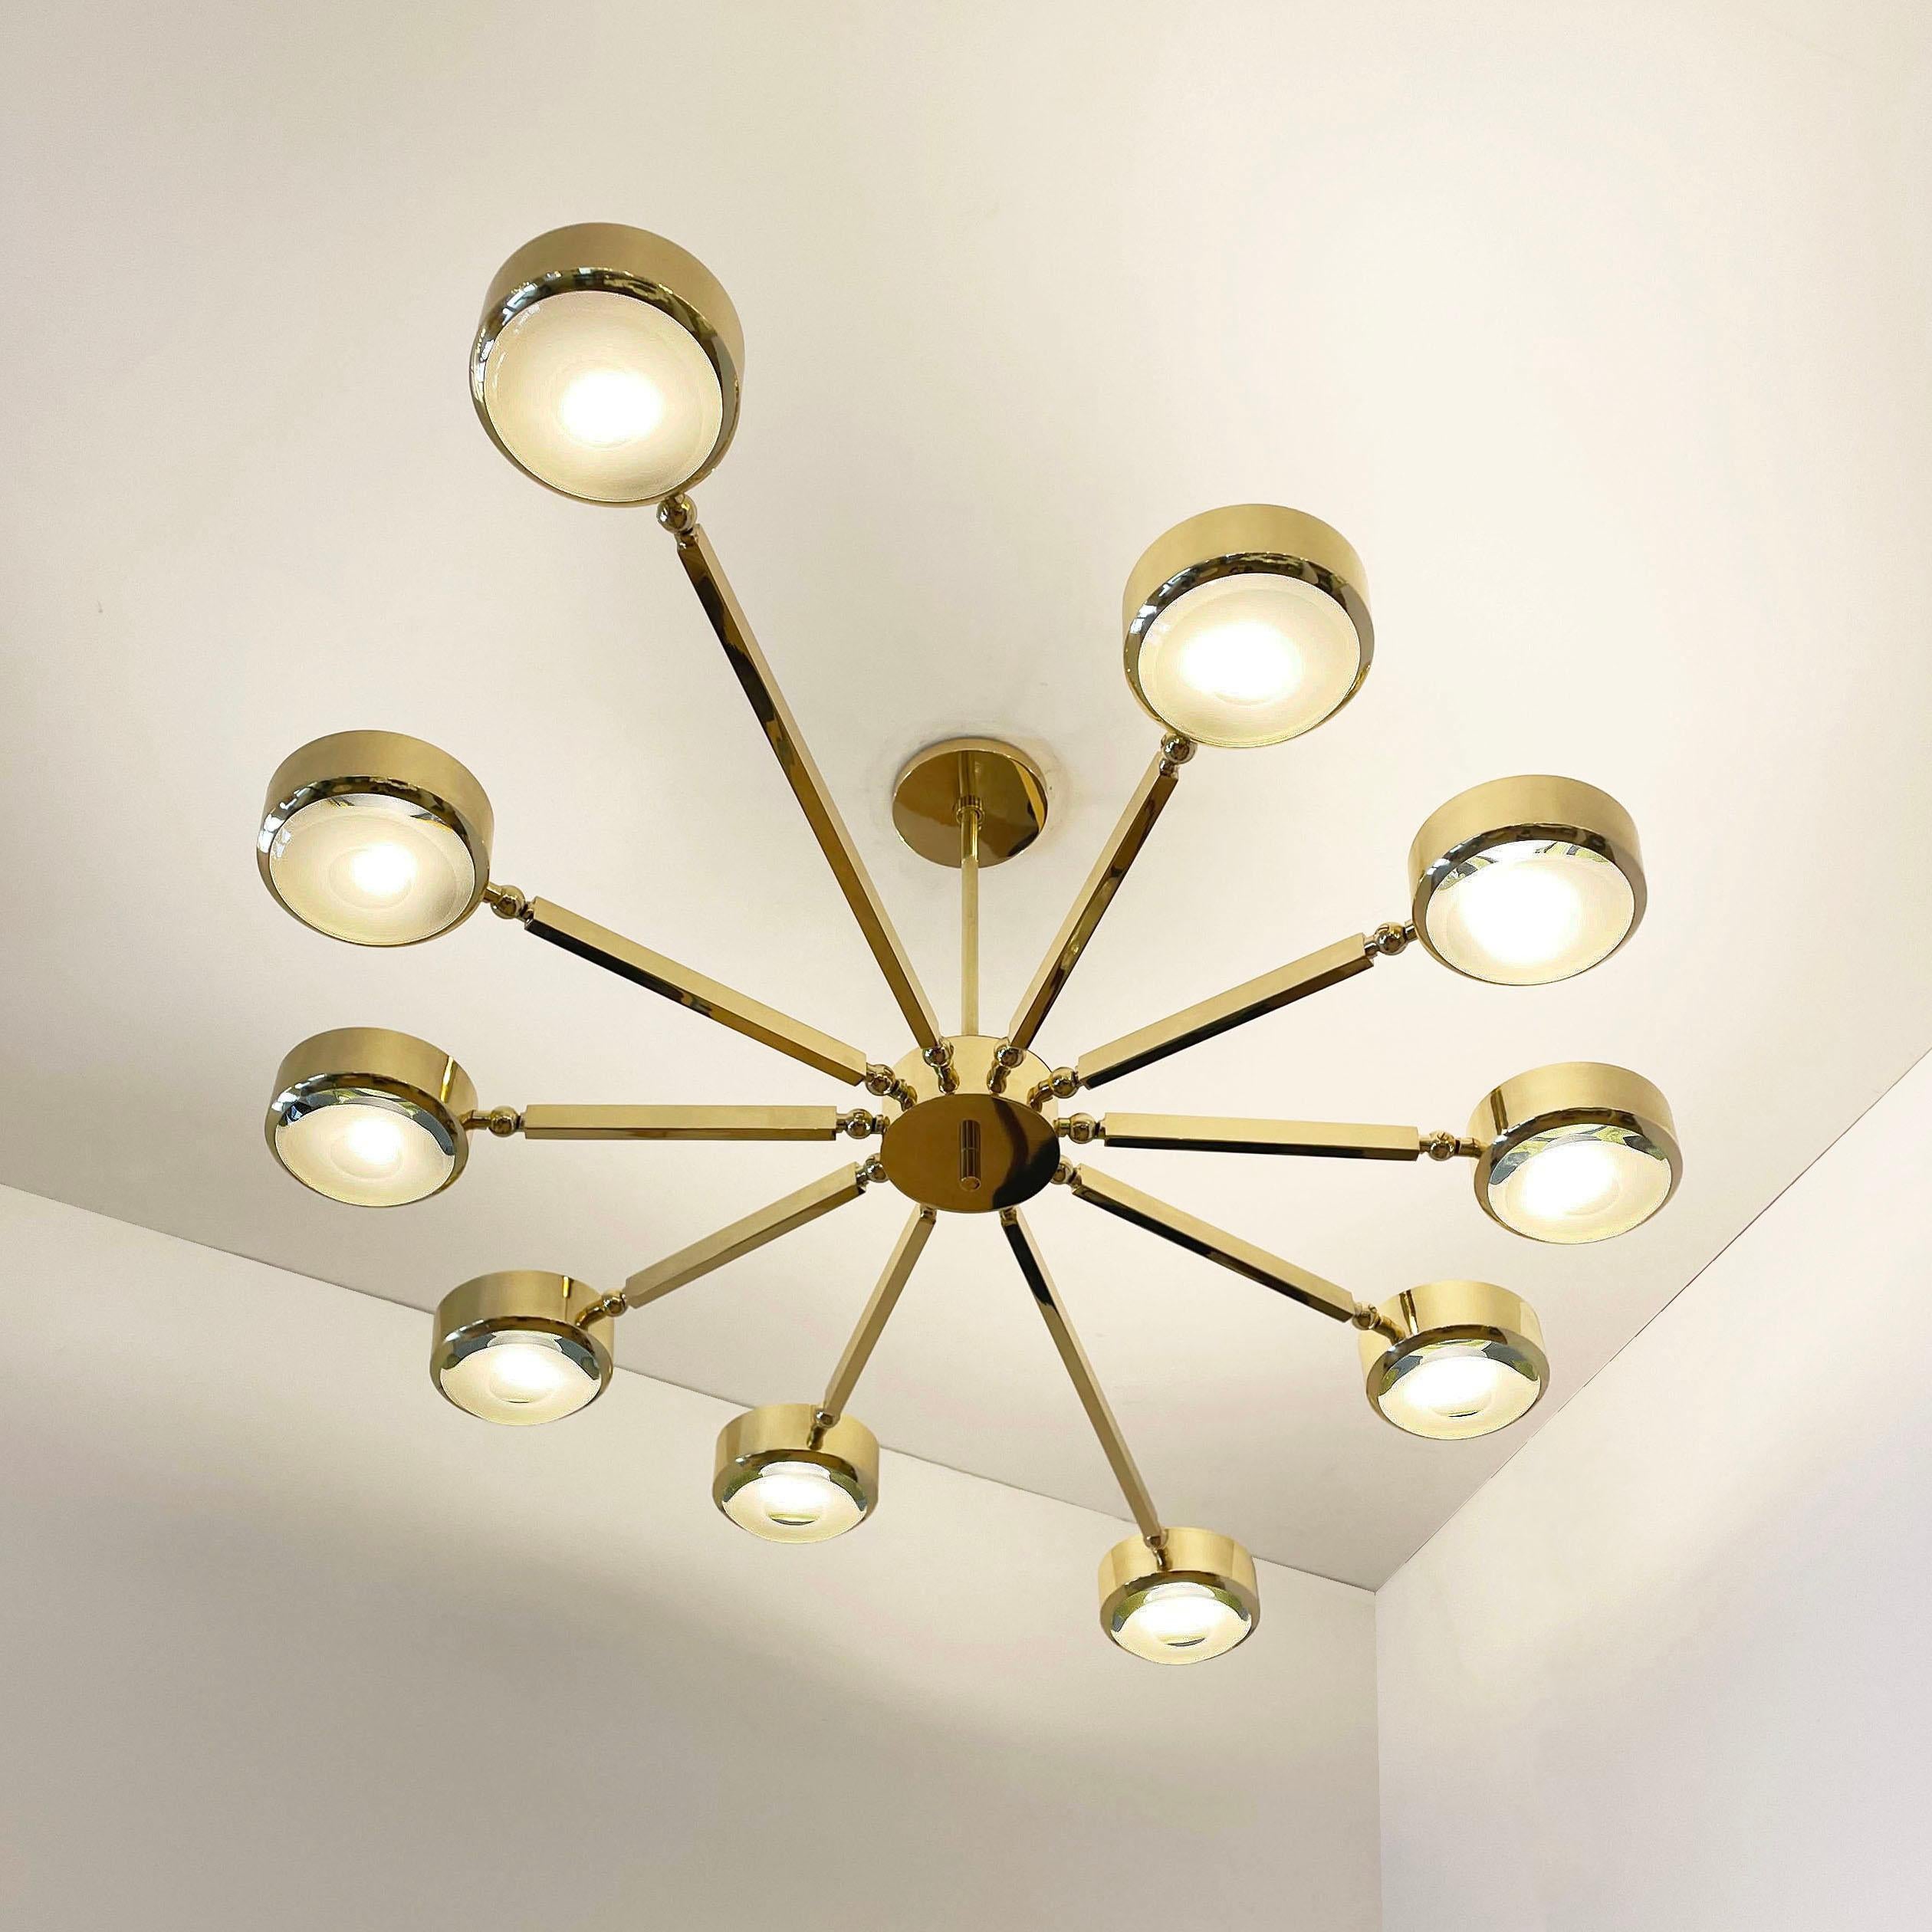 Brass Oculus Oval Ceiling Light by Gaspare Asaro- Bronze Finish with Carved Glass For Sale